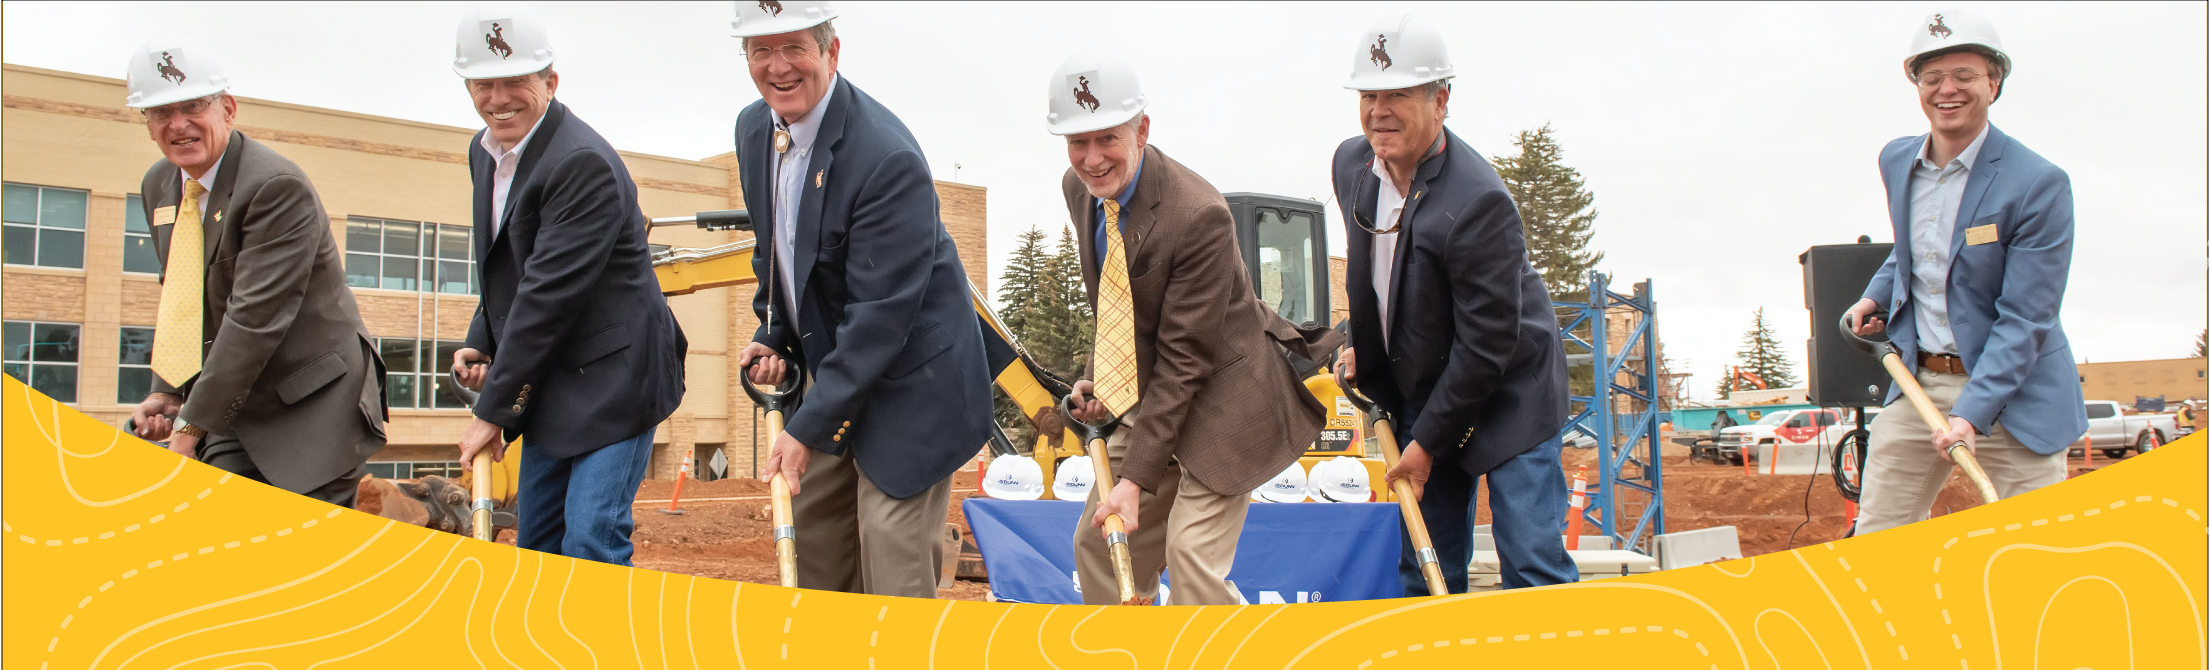 Board of Trustees and President Siedel breaking ground on the new Residence Halls